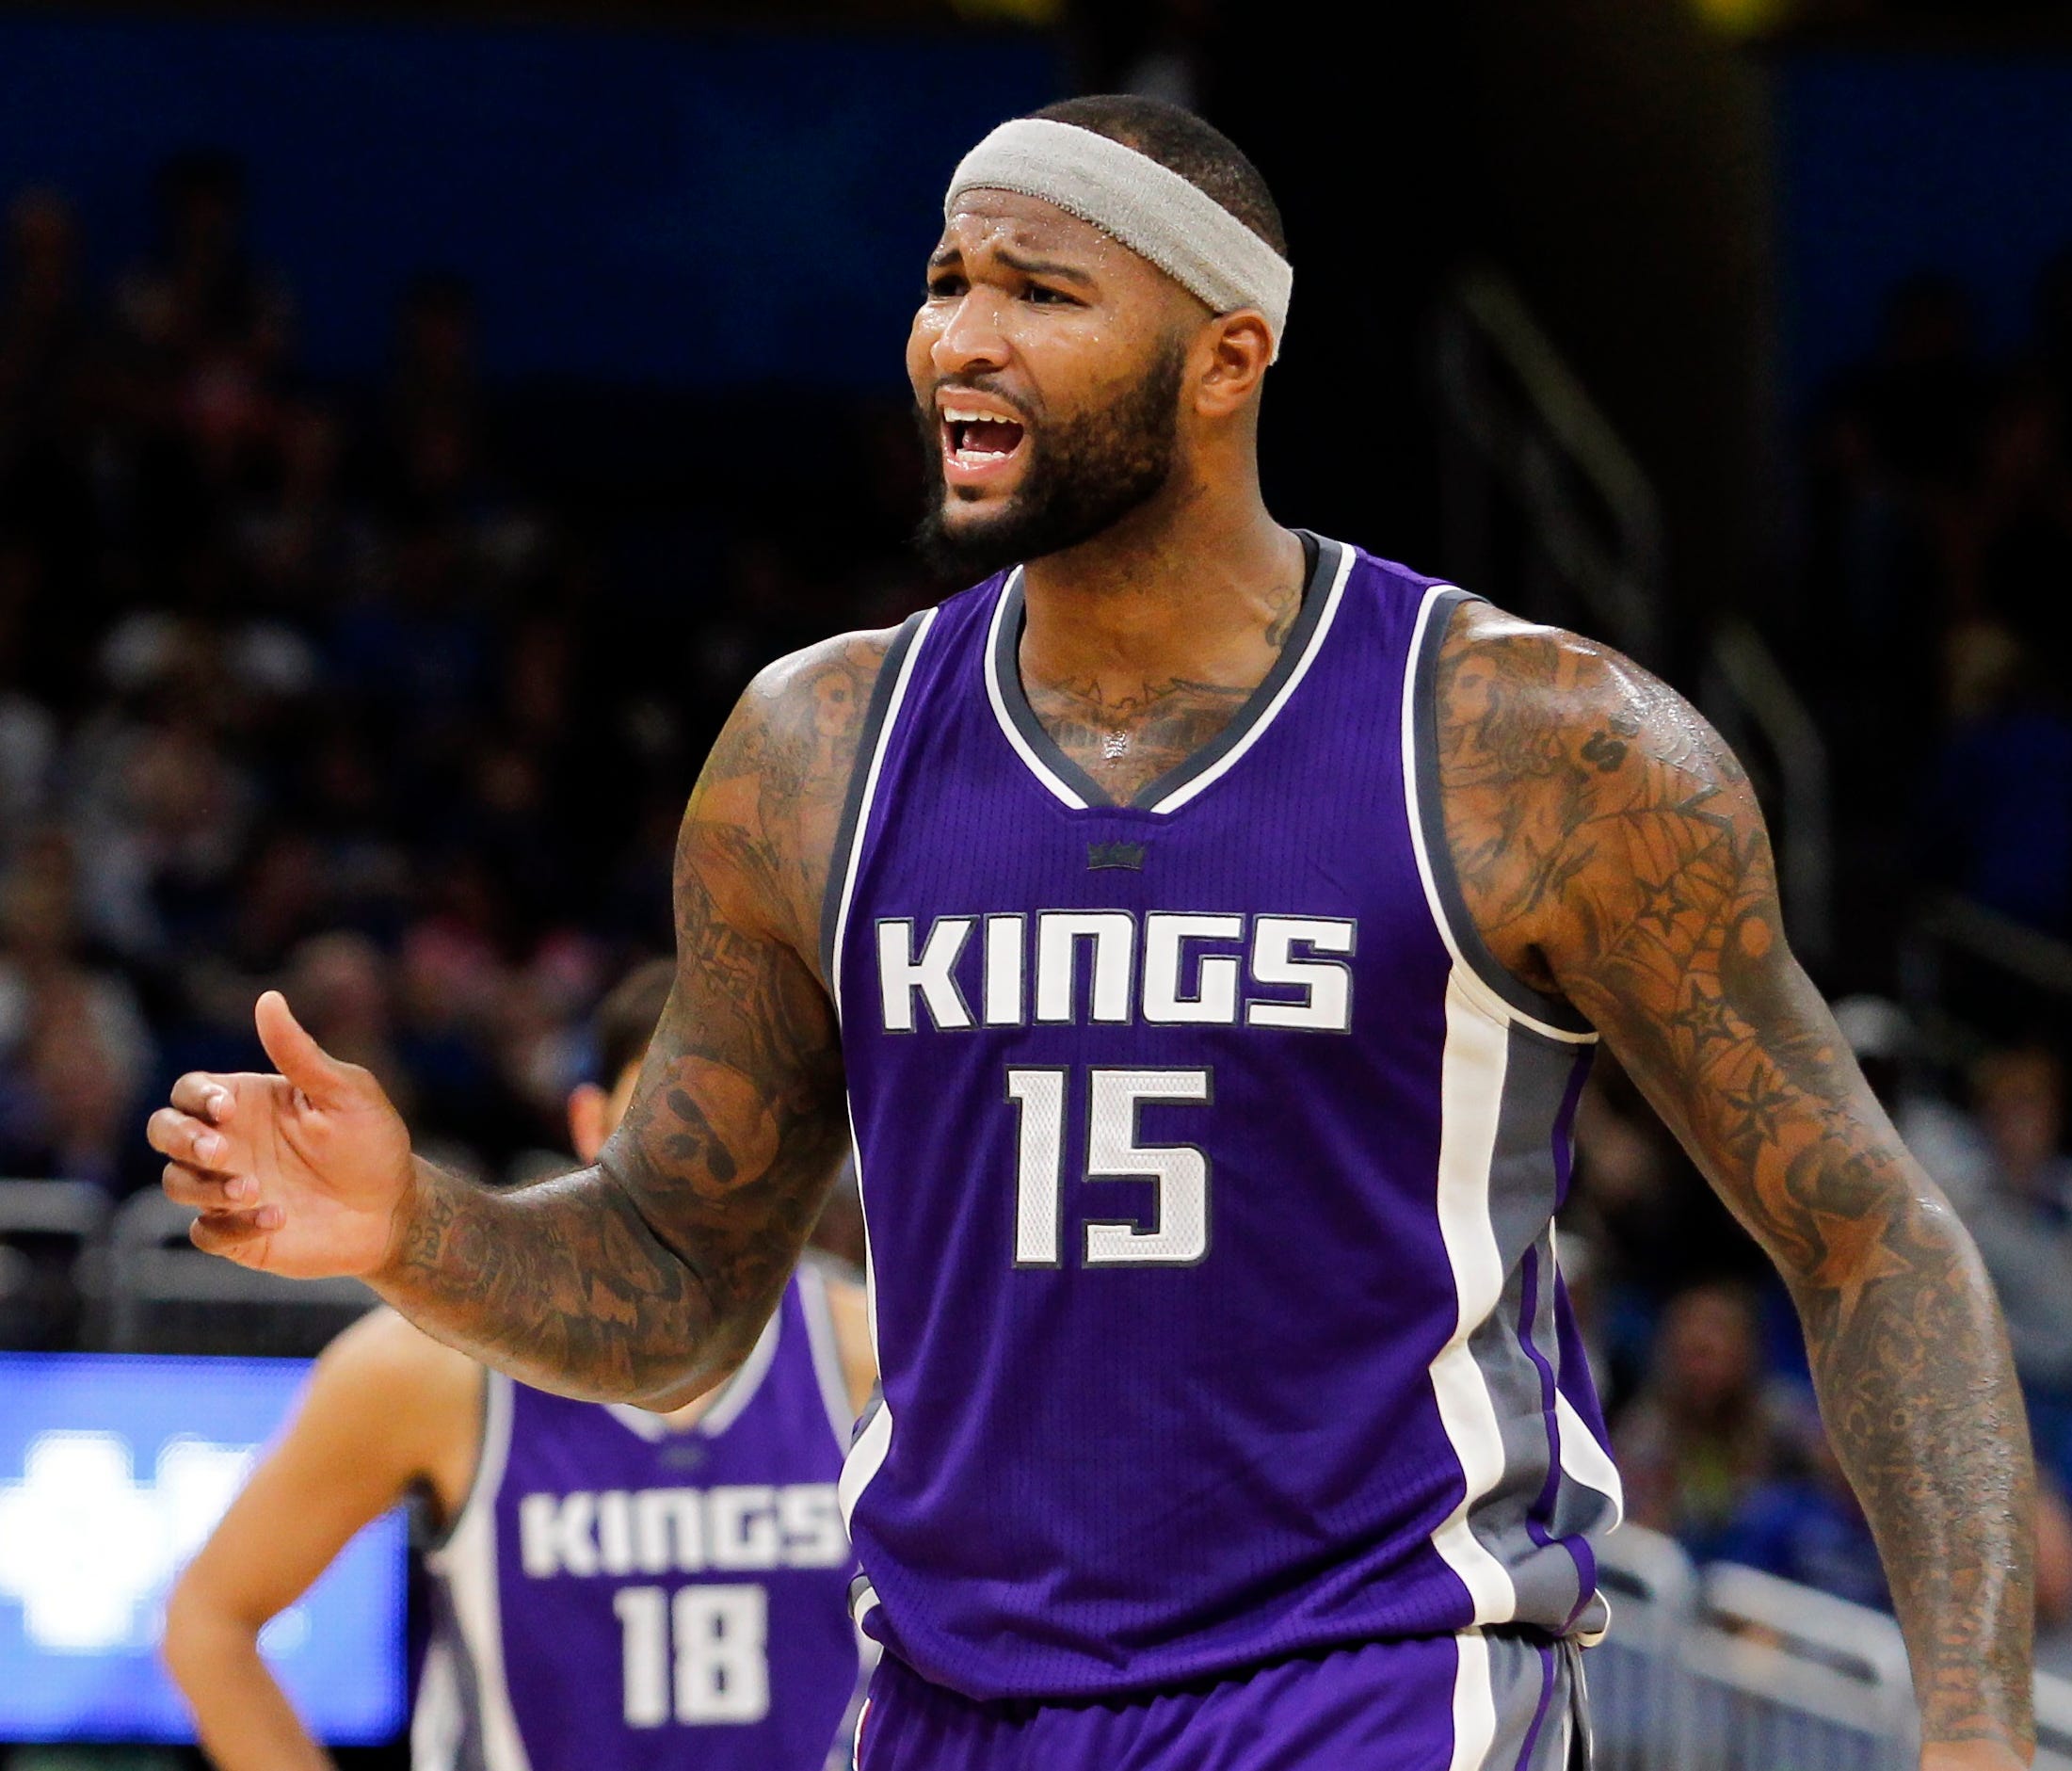 DeMarcus Cousins is averaging 27.8 points and 10.6 rebounds a game this season.